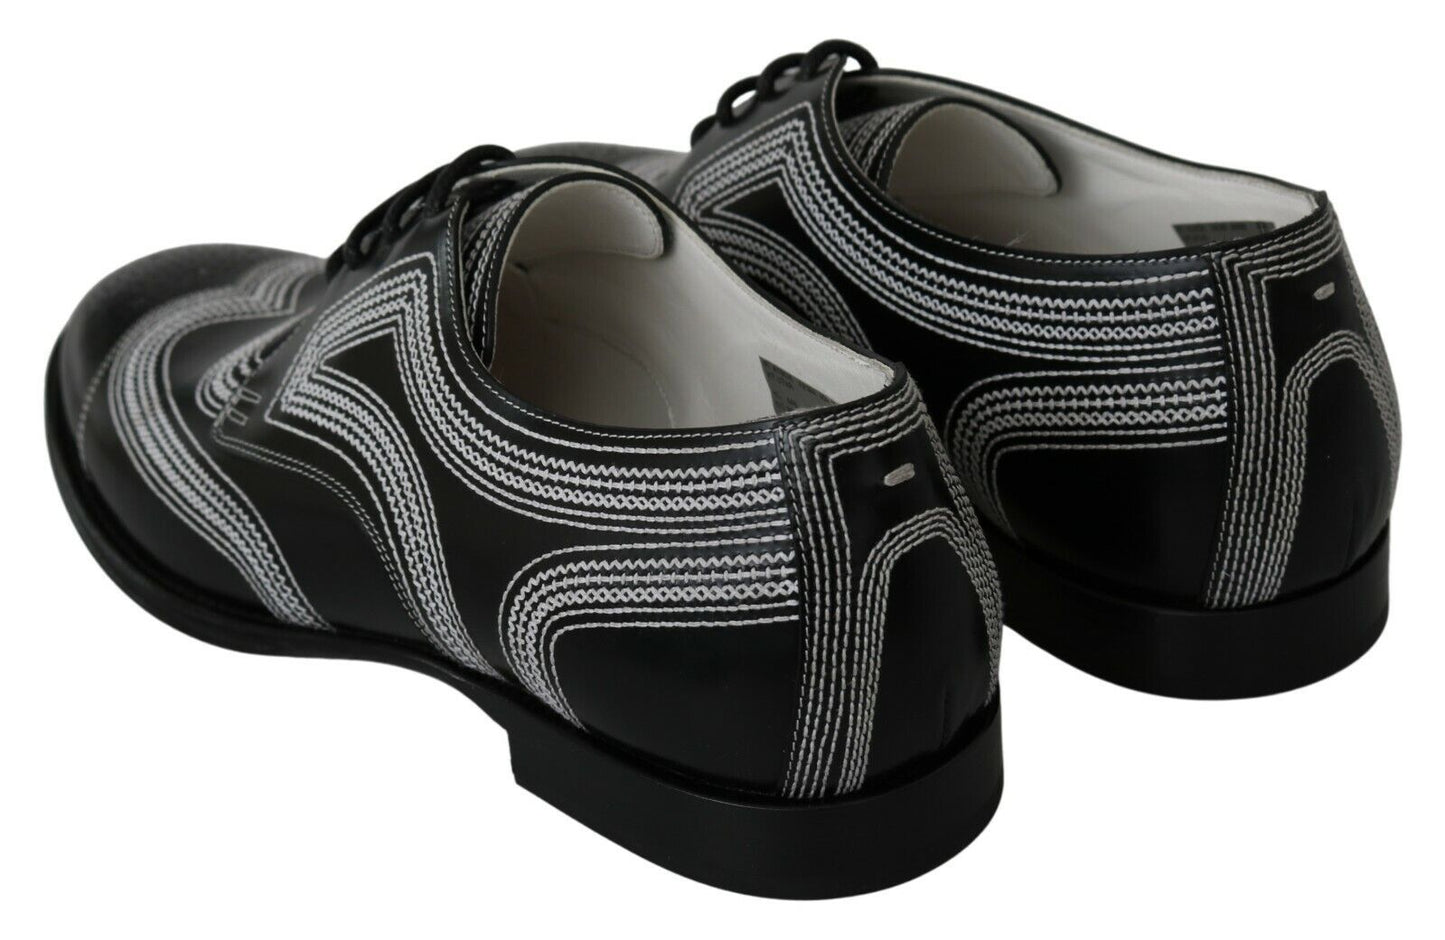 Elegant Black and White Derby Shoes